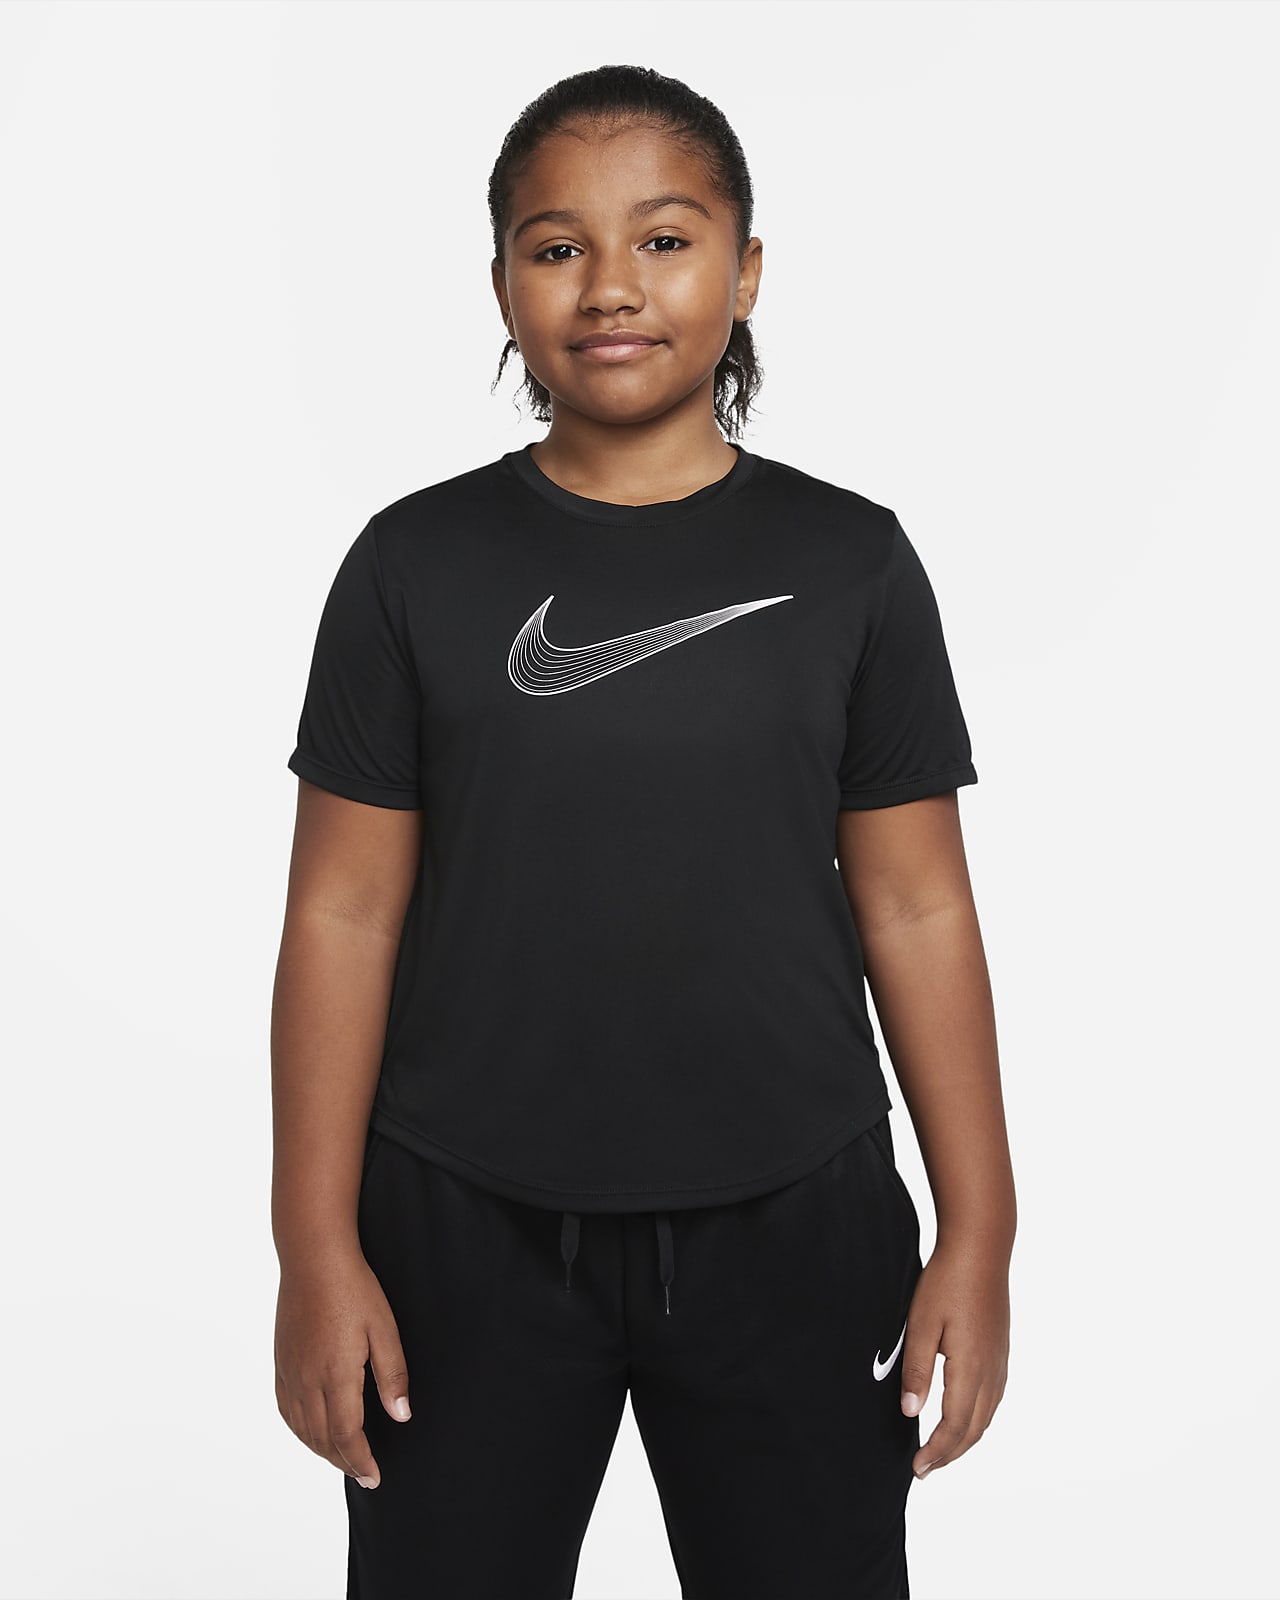 Nike Dri-FIT One Older Kids' (Girls') Short-Sleeve Training Top (Extended Size)